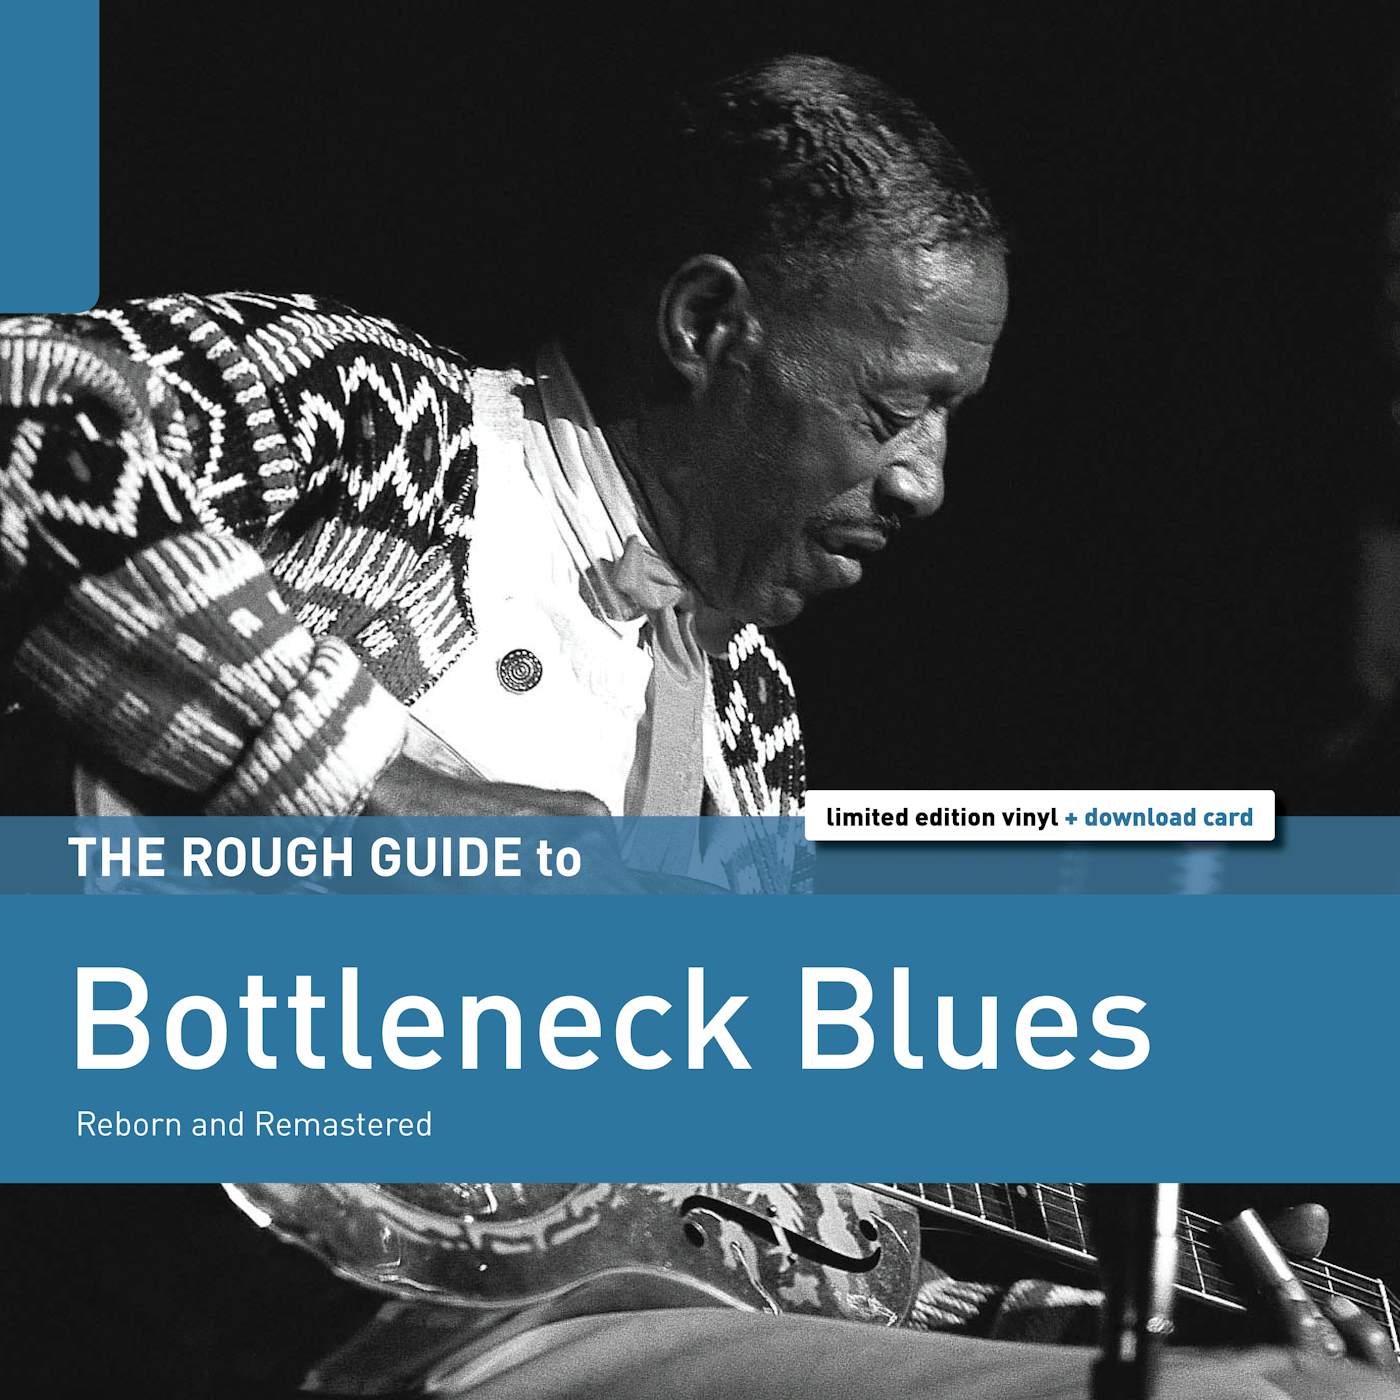 ROUGH GUIDE TO BOTTLENECK BLUES (SECOND EDITION) Vinyl Record